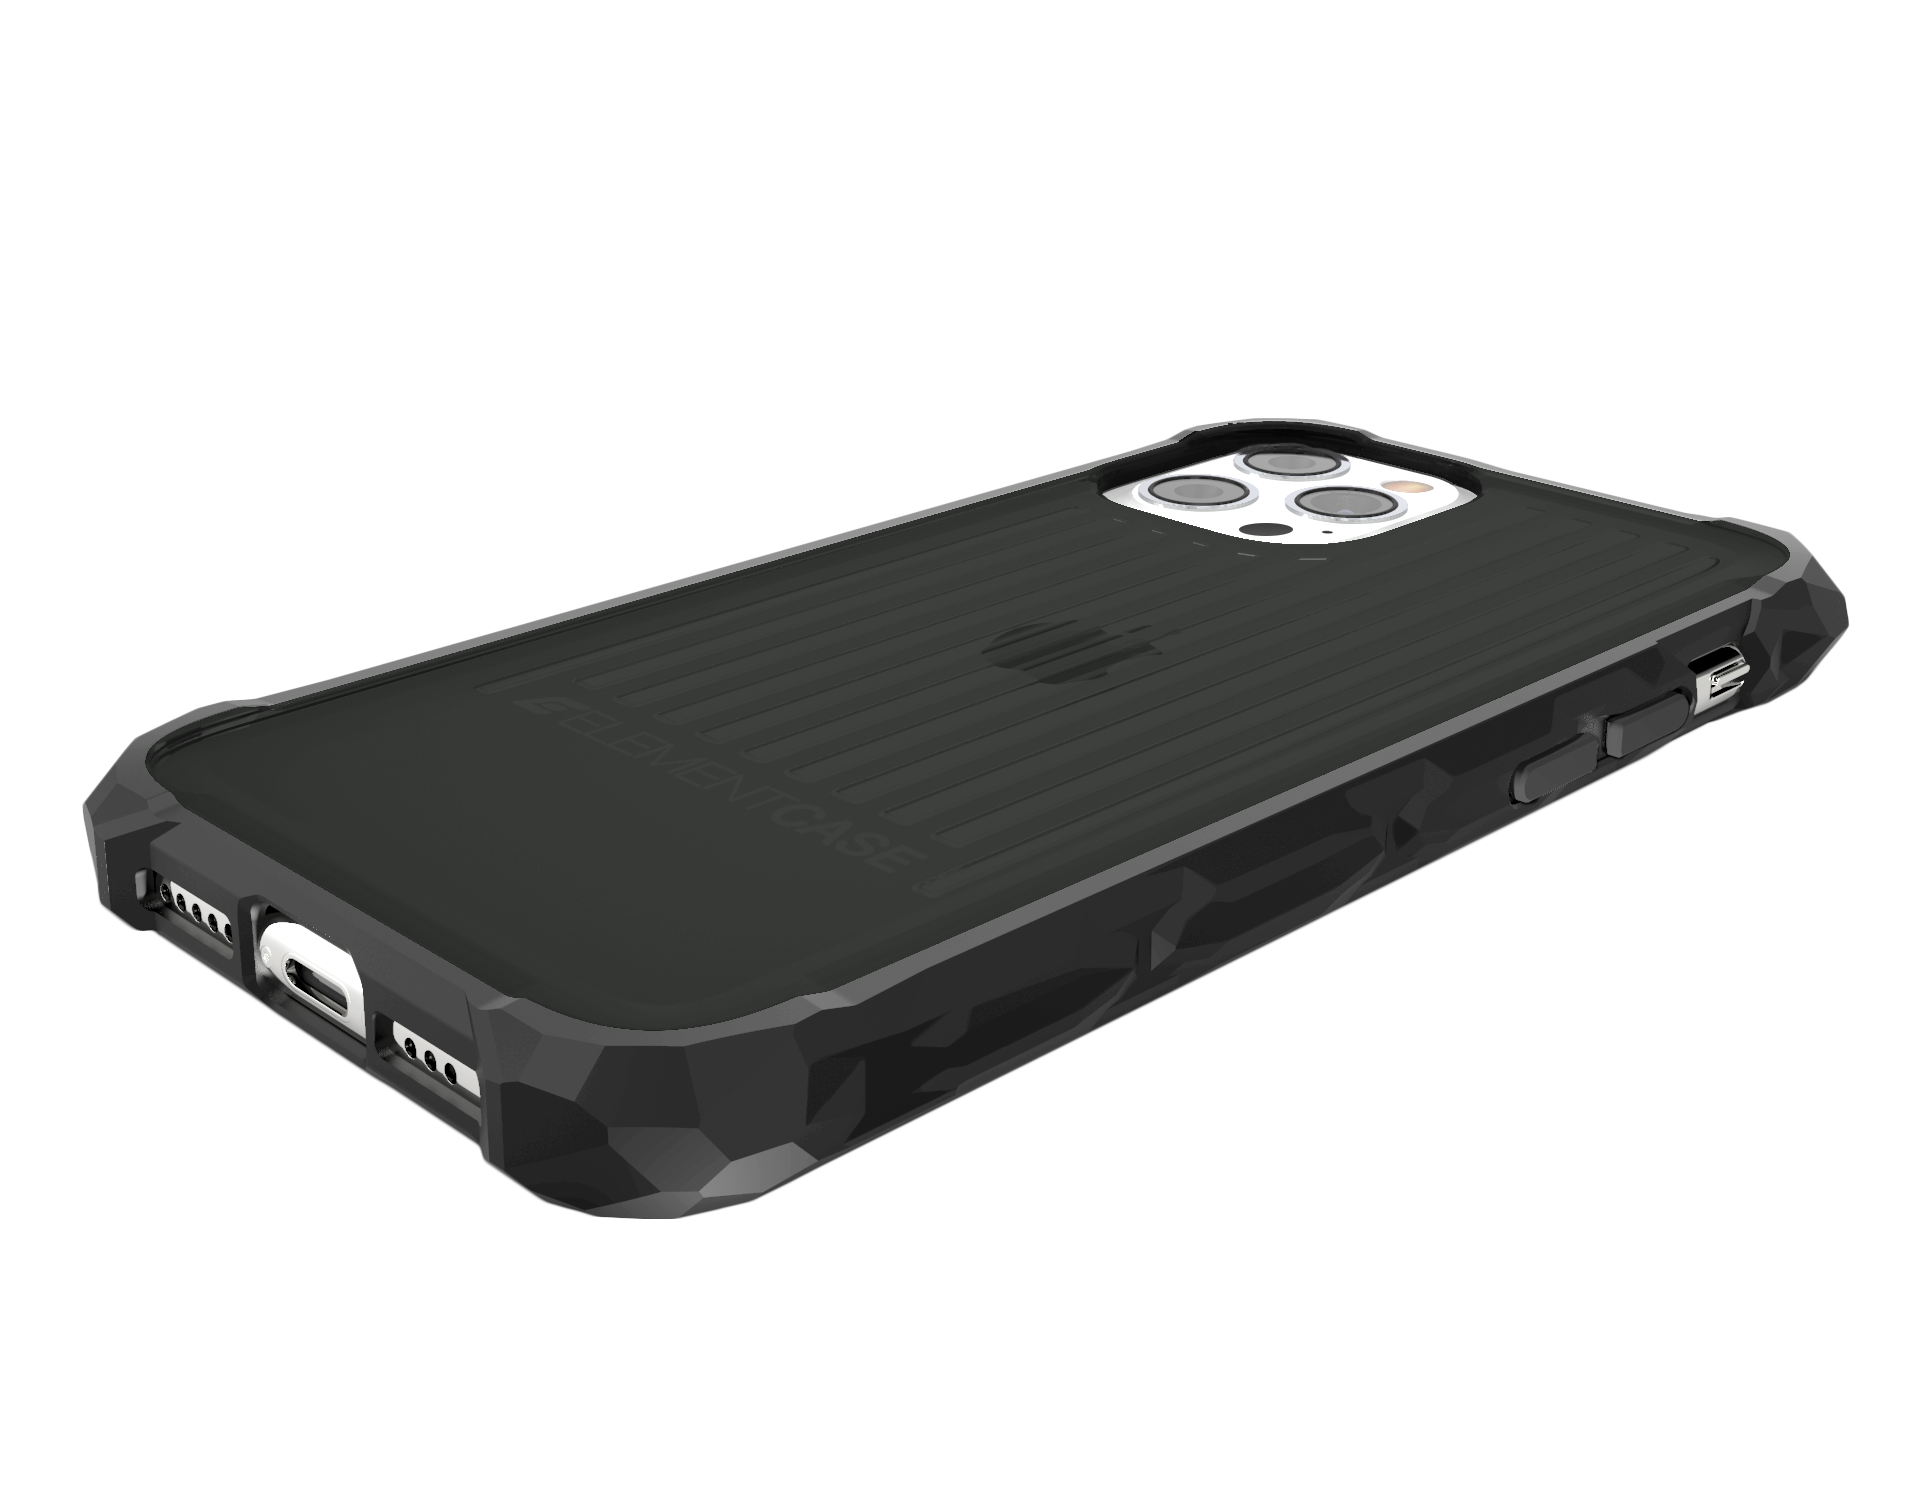 Element Case SPECIAL OPS iPhone 12 Pro Max